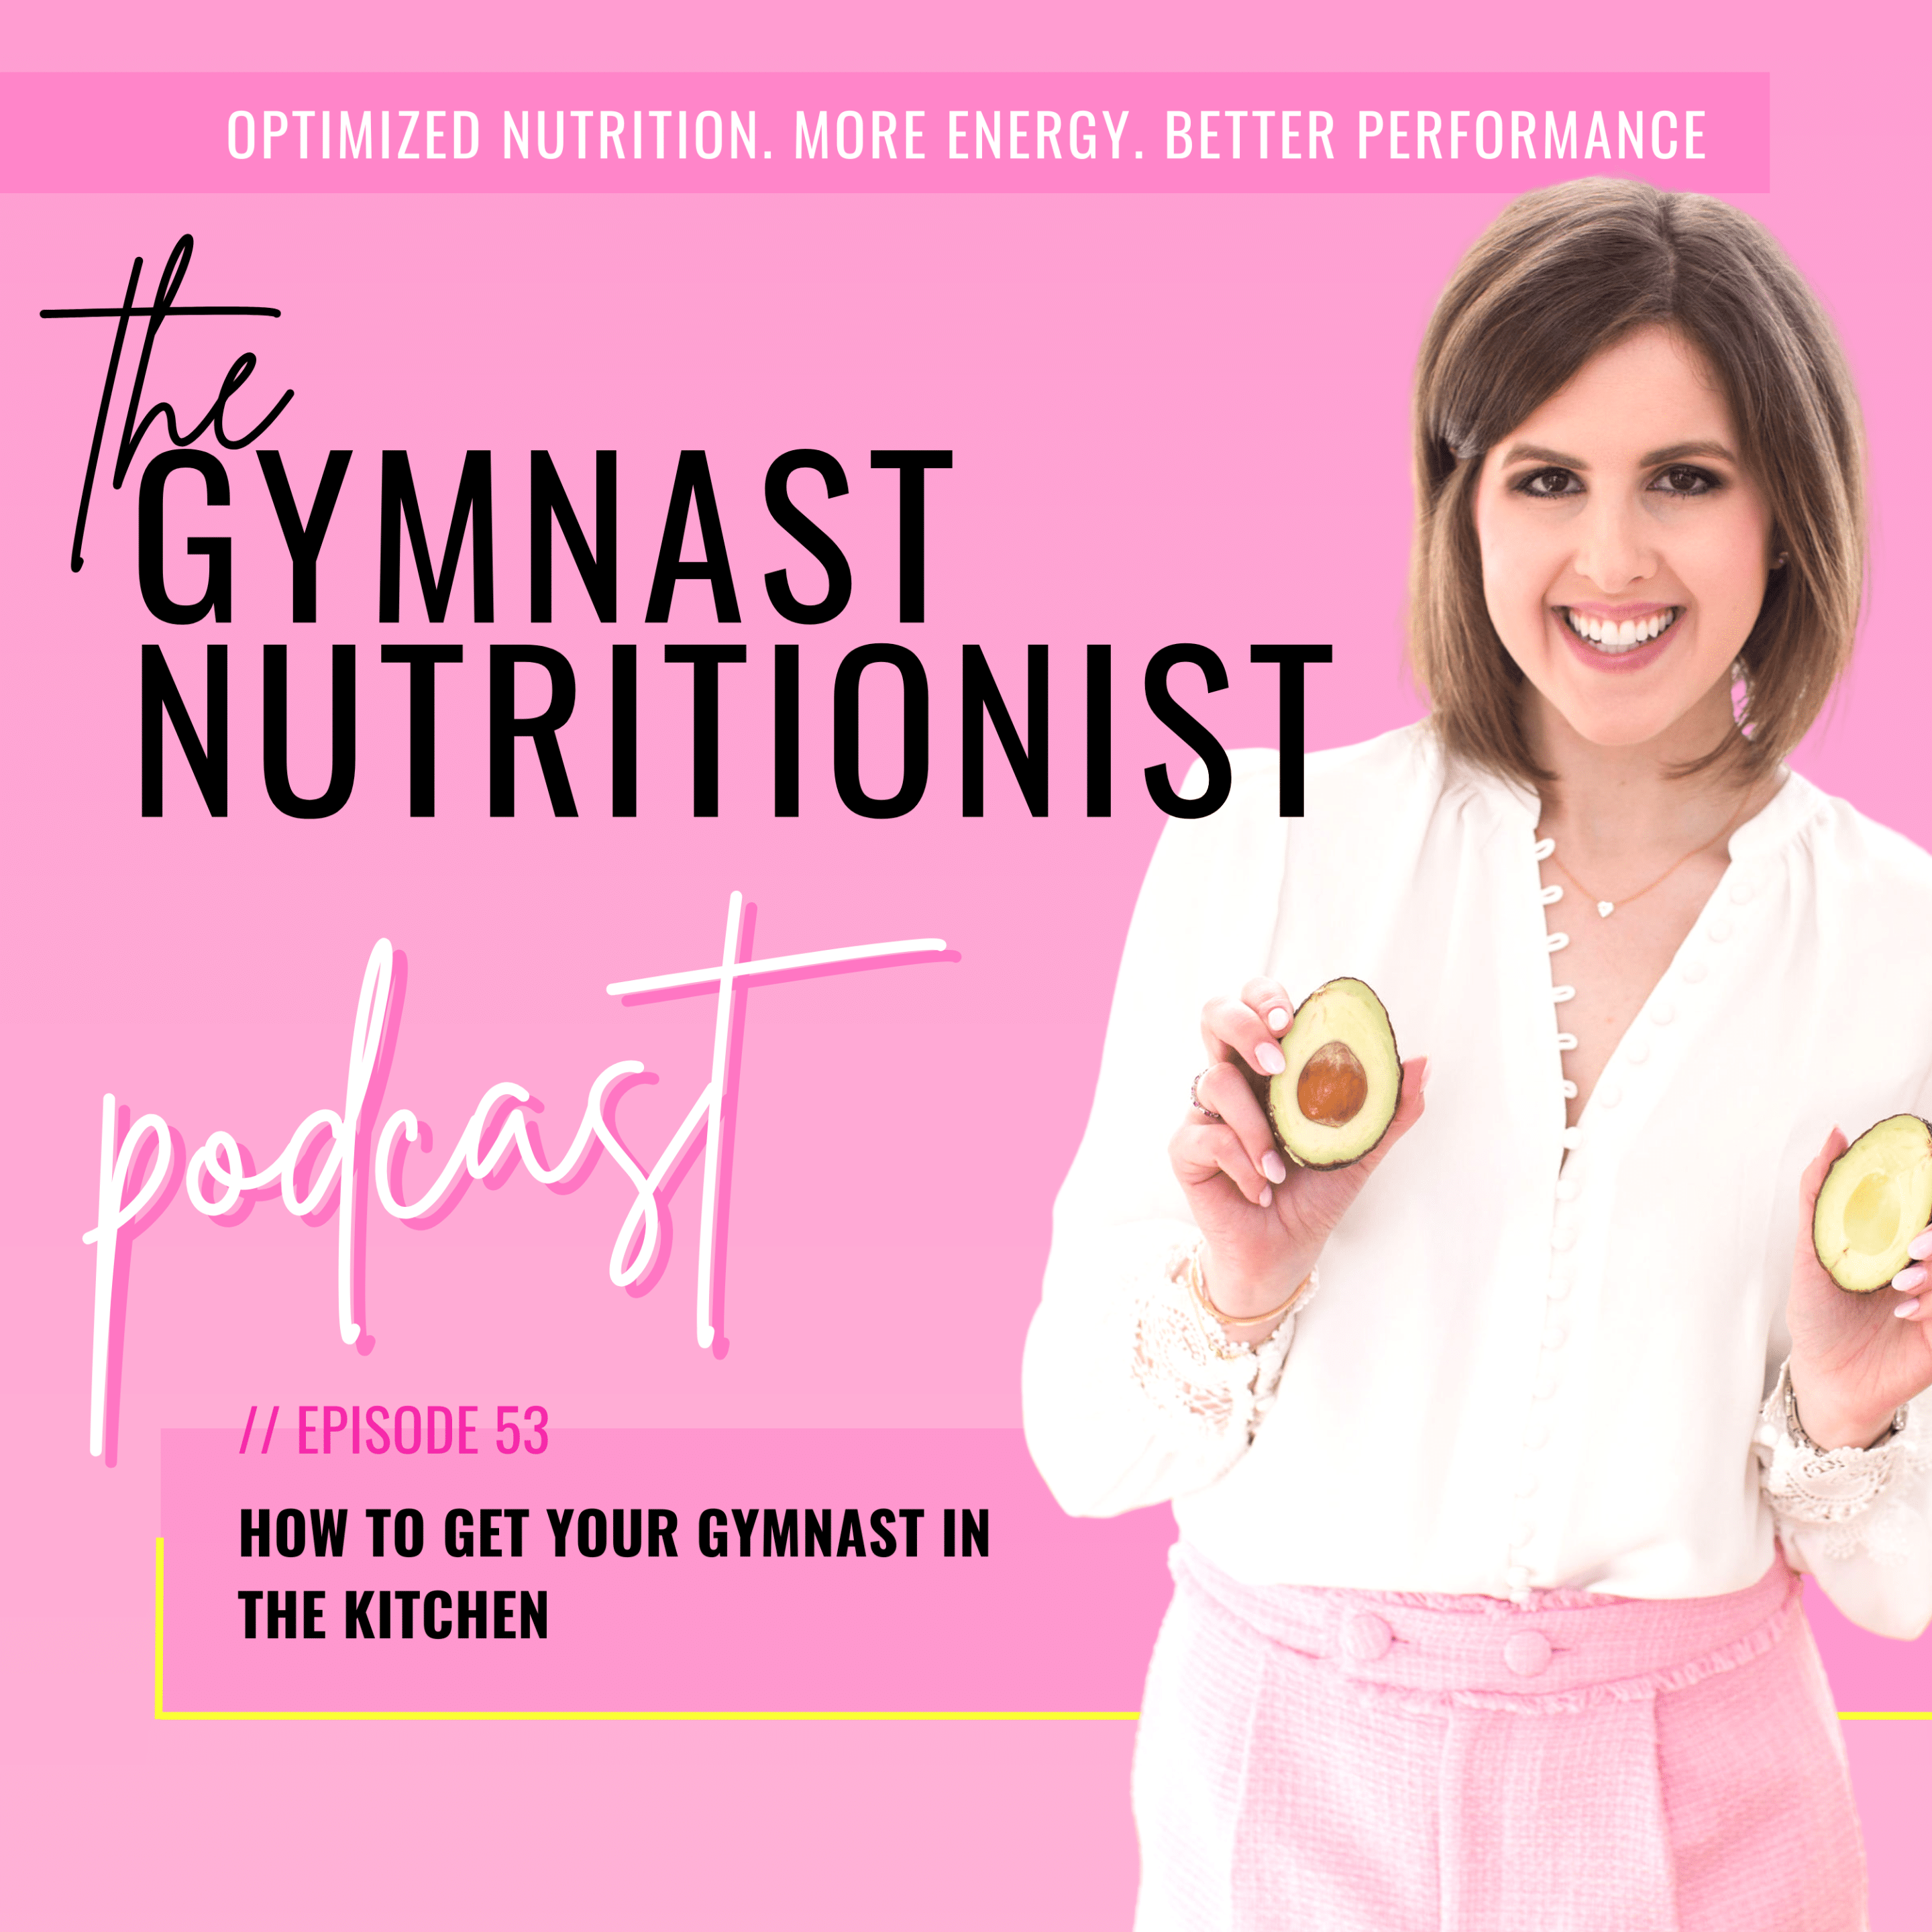 Episode 53: How to Get Your Gymnast in the Kitchen